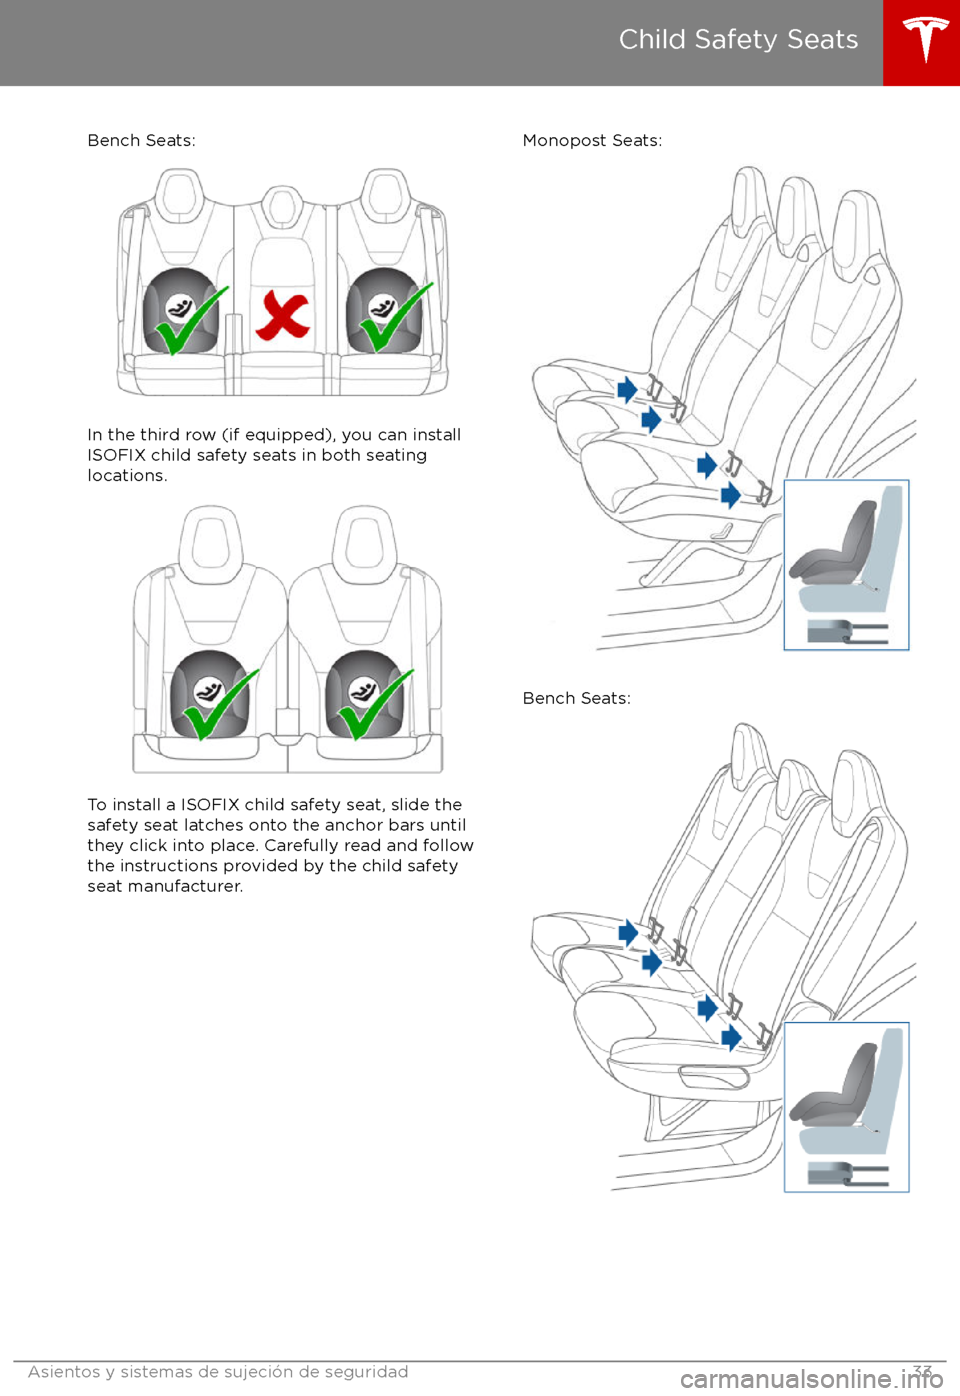 TESLA MODEL X 2017  Manual del propietario (in Spanish) Bench Seats:
In the third row (if equipped), you can install
ISOFIX child safety seats in both seating
locations.
To install a ISOFIX child safety seat, slide the
safety seat latches onto the anchor b